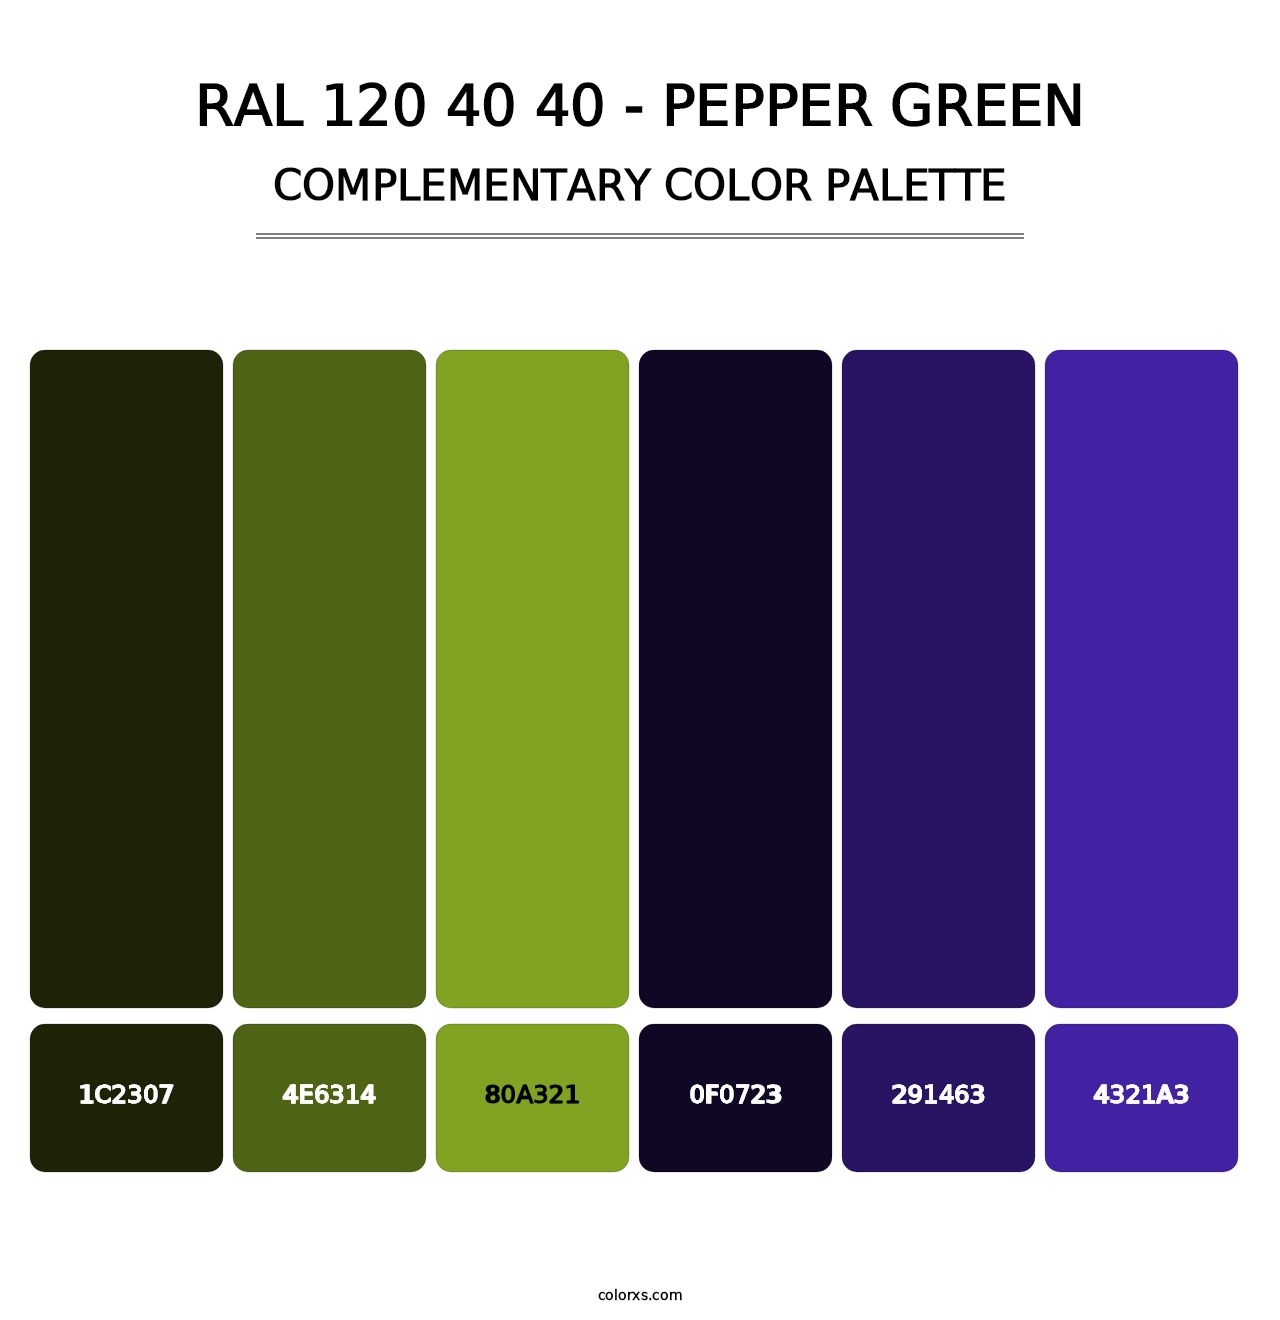 RAL 120 40 40 - Pepper Green - Complementary Color Palette